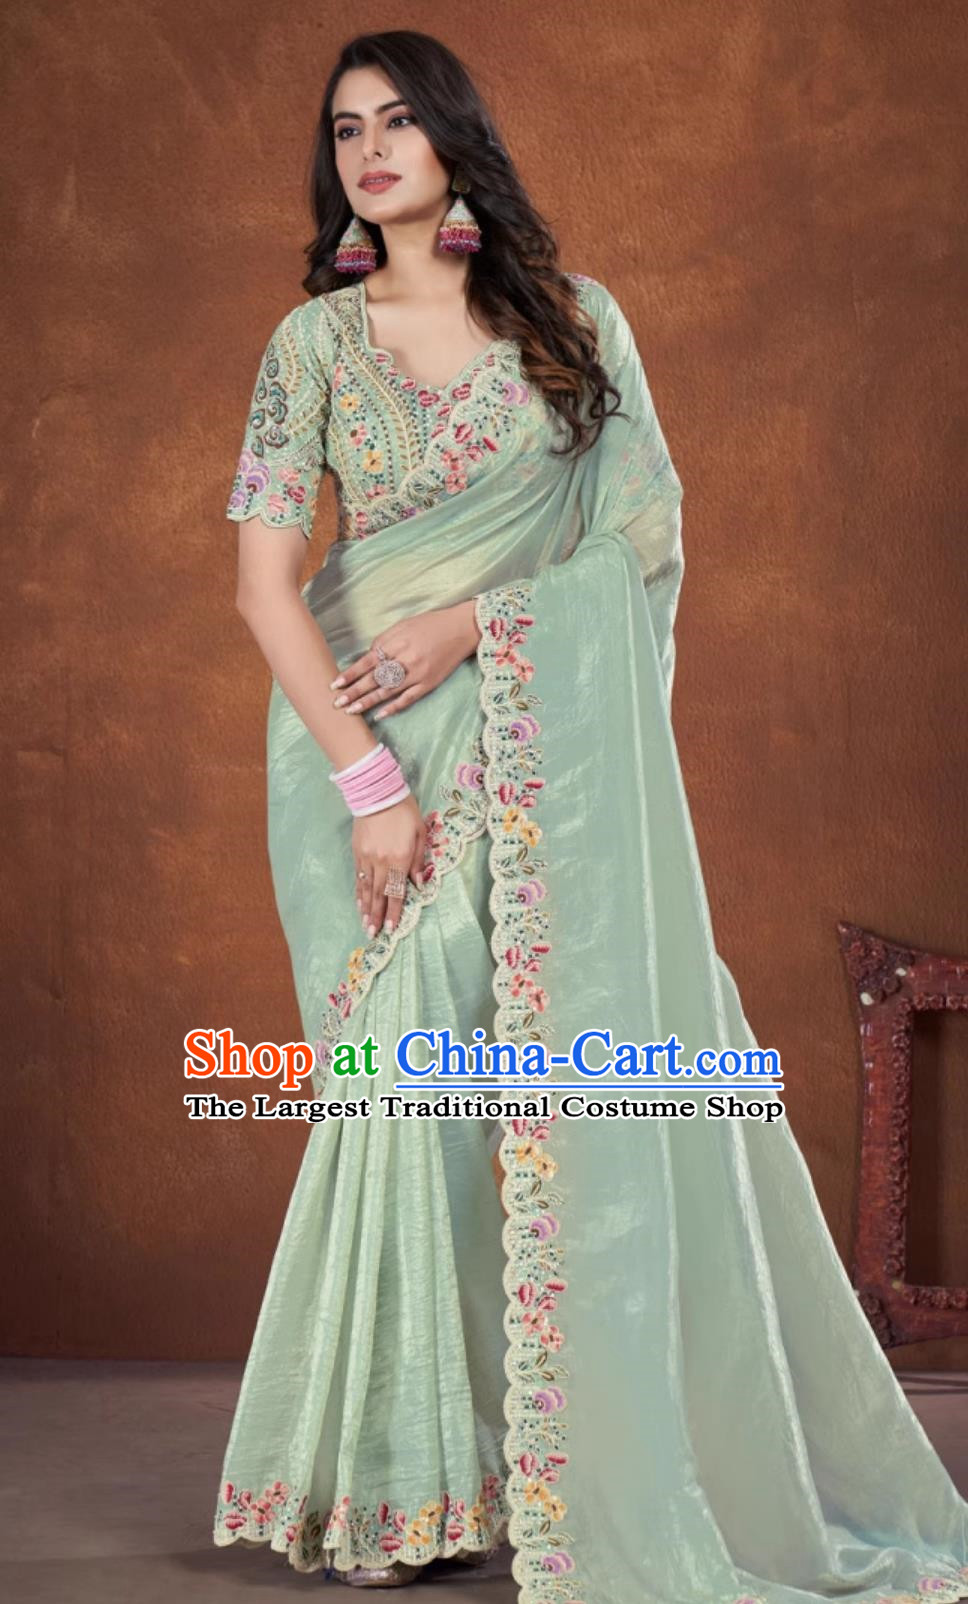 Light Green Embroidered National Indian Saree With Diamonds Features Traditional Festival Party Women Wrap Skirt Sari